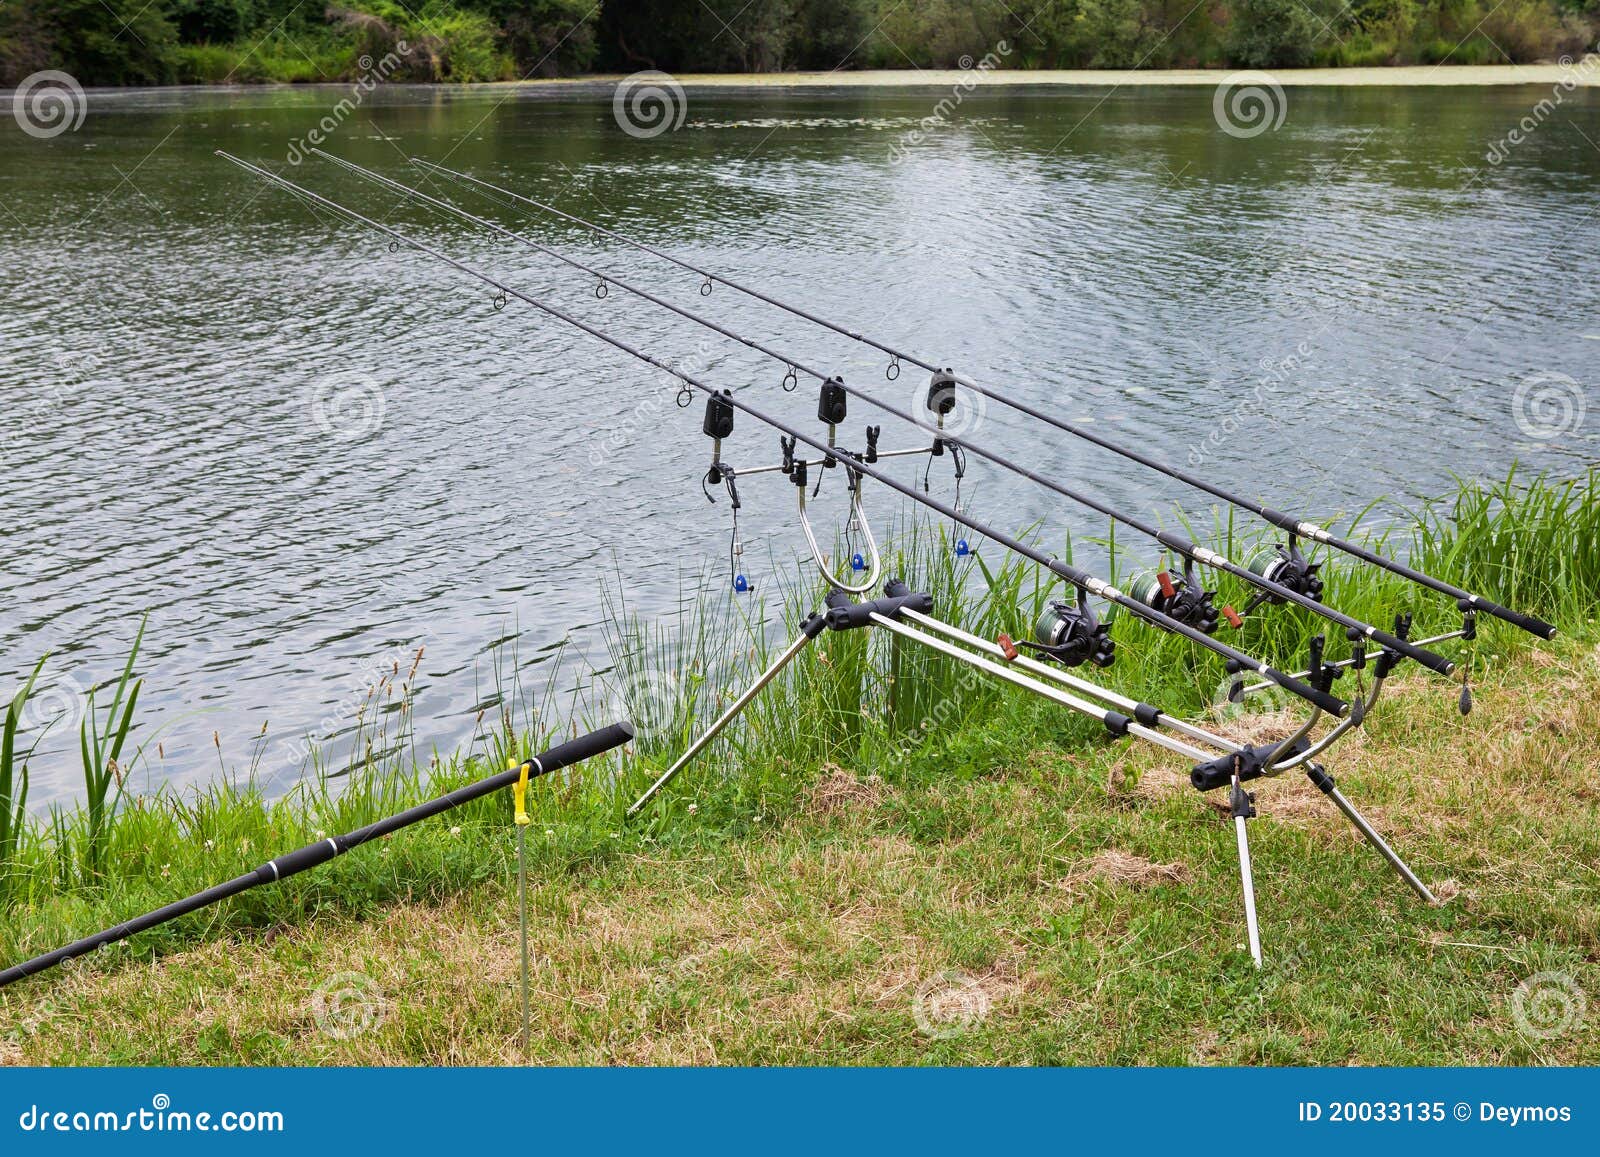 398 Rod Mounted Stock Photos - Free & Royalty-Free Stock Photos from  Dreamstime